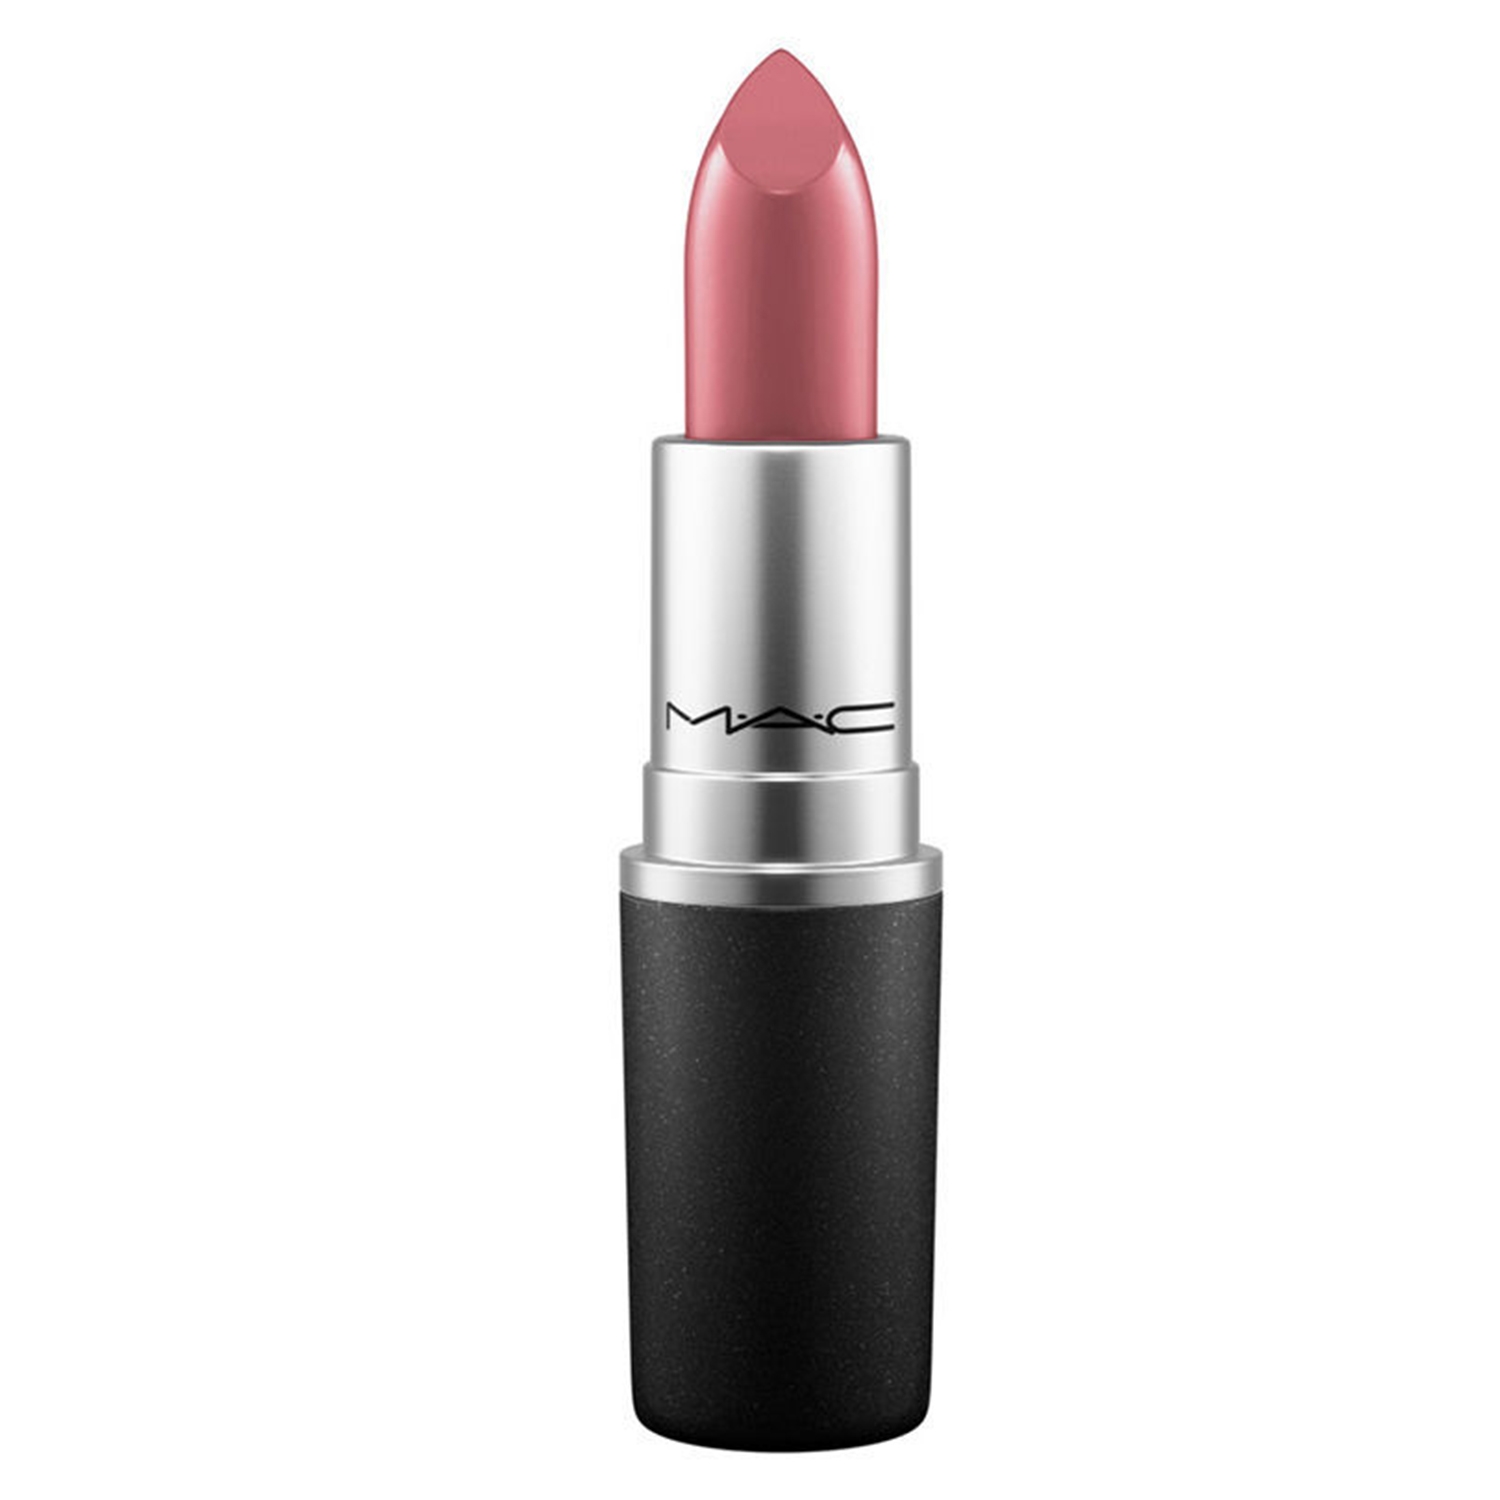 M.A.C | M.A.C Cremesheen Lipstick - Creme In Your Coffee (3g)